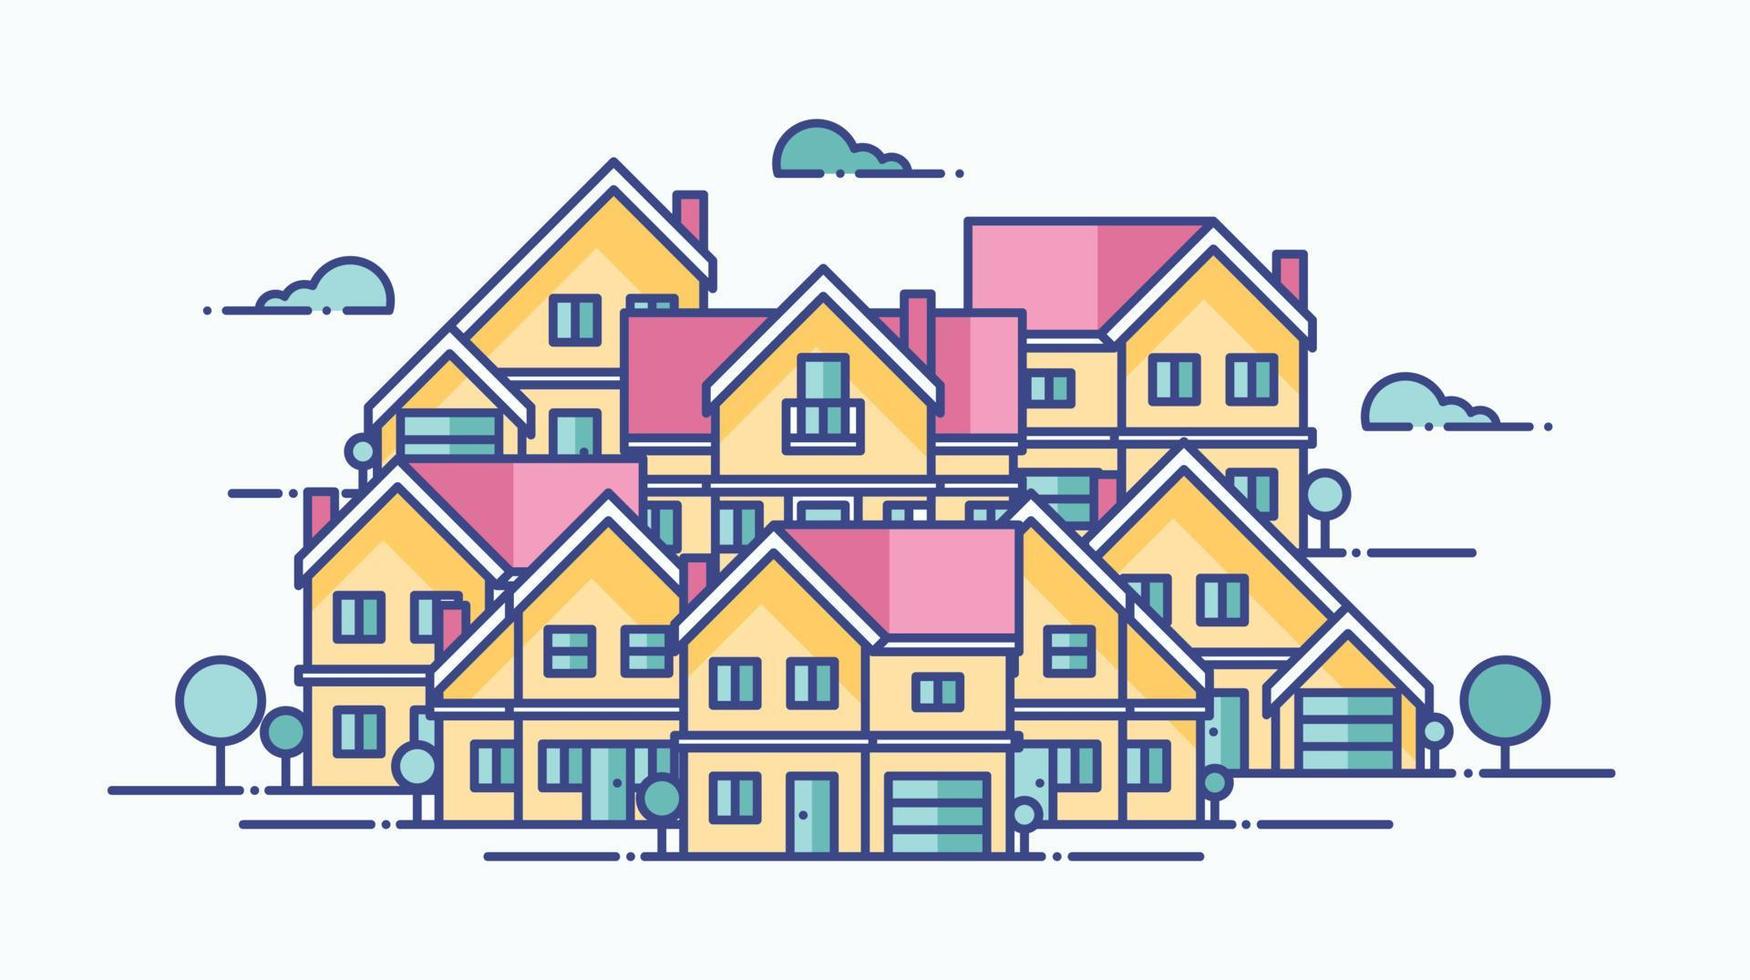 Abstract flat houses background vector